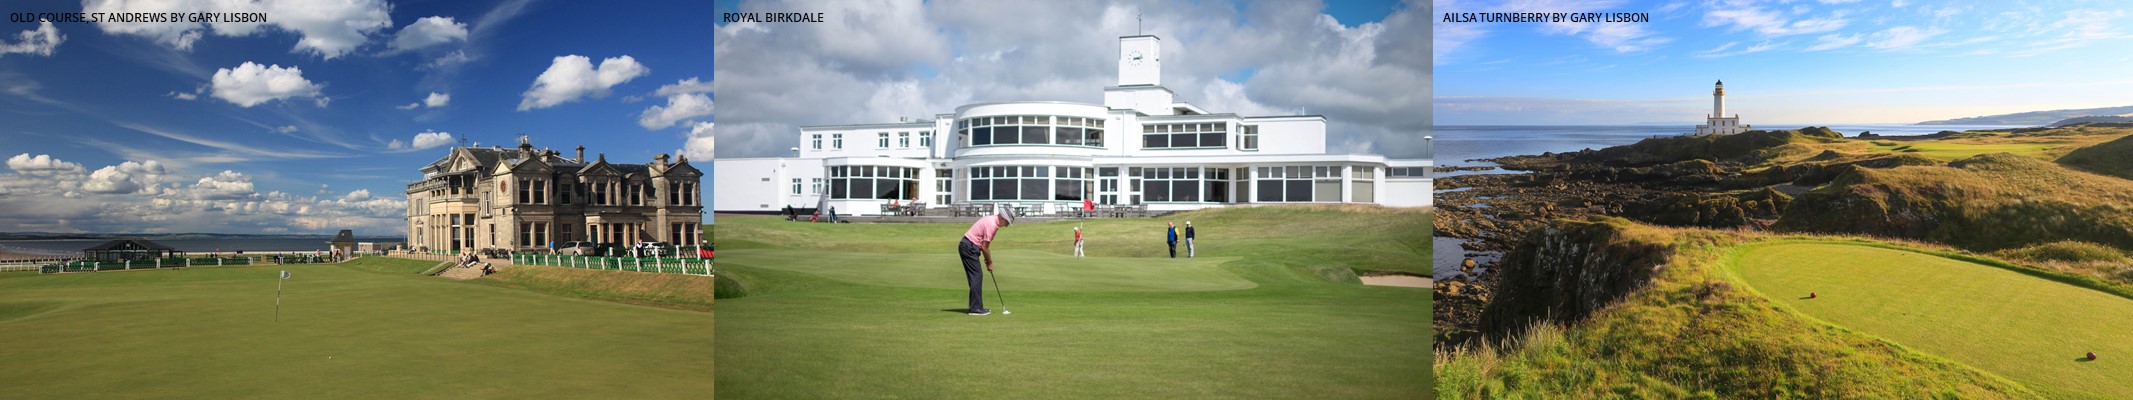 The Ultimate Open Venues & Old Course at St Andrews Escorted Tour 2025